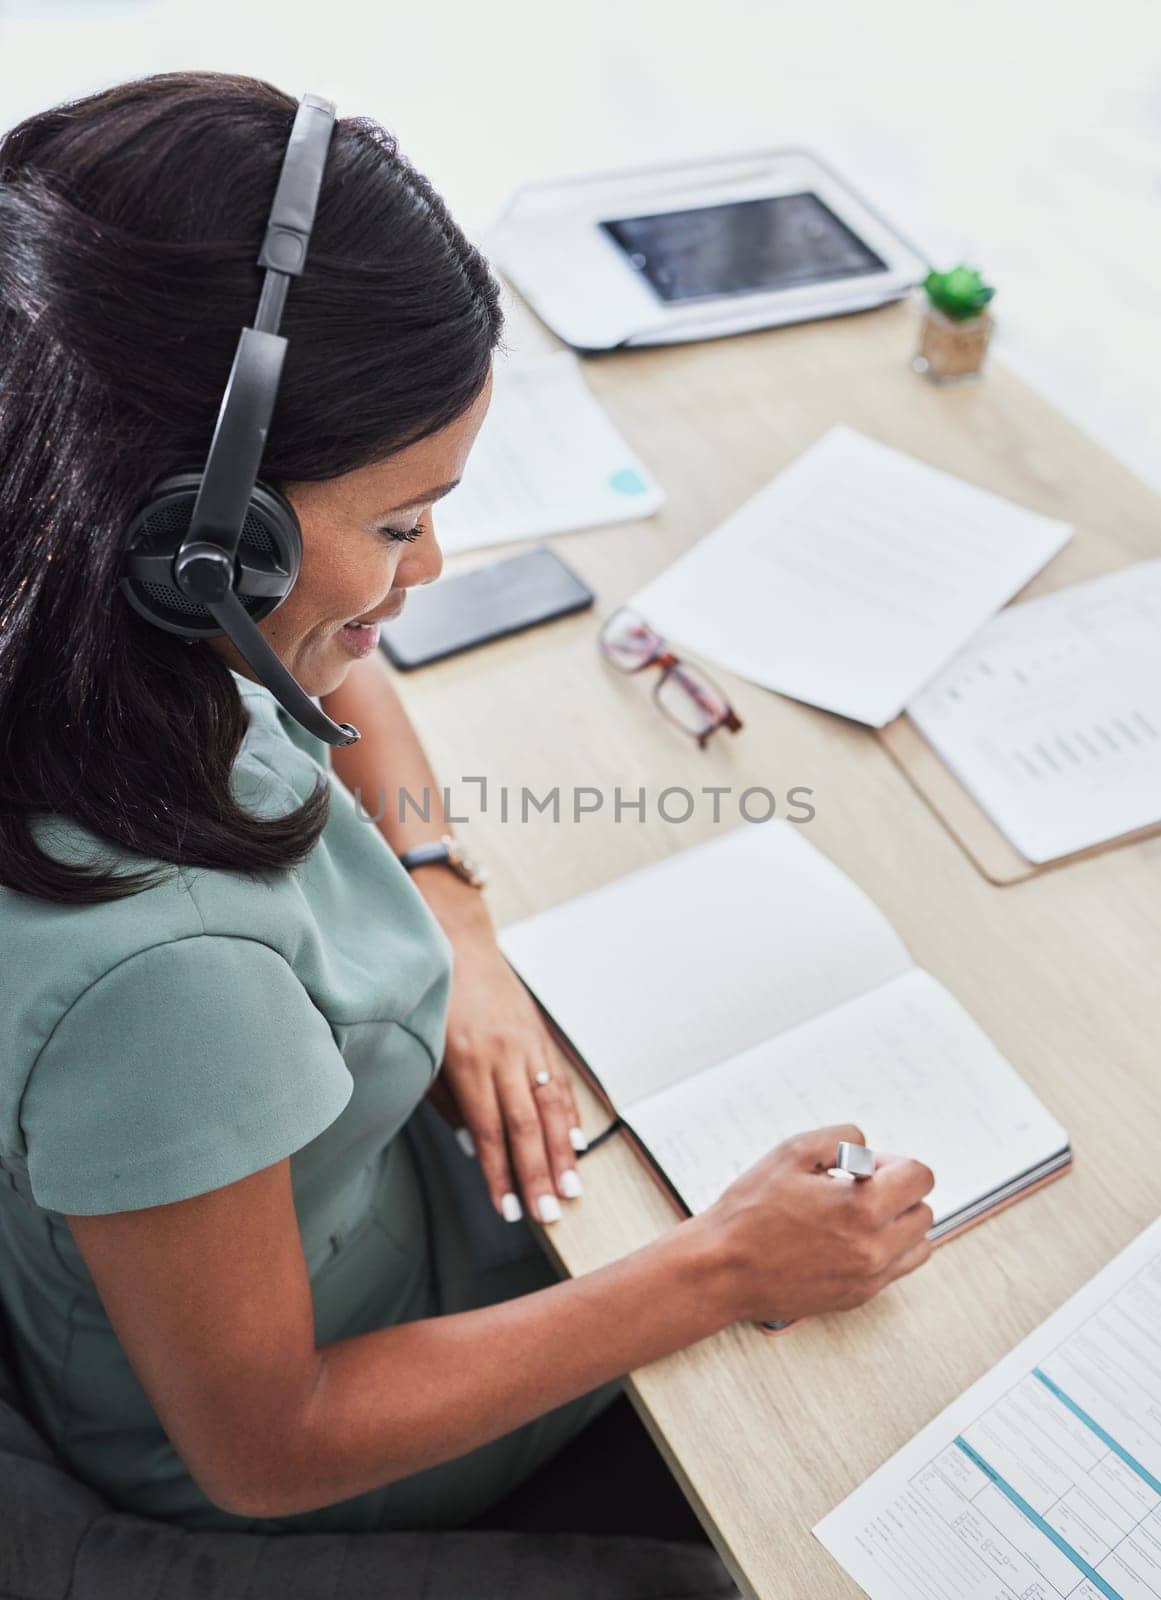 Customer support, call center and black woman writing in notebook for schedule, planning and feedback. Contact us, receptionist and female consultant in customer service, help desk and telemarketing.